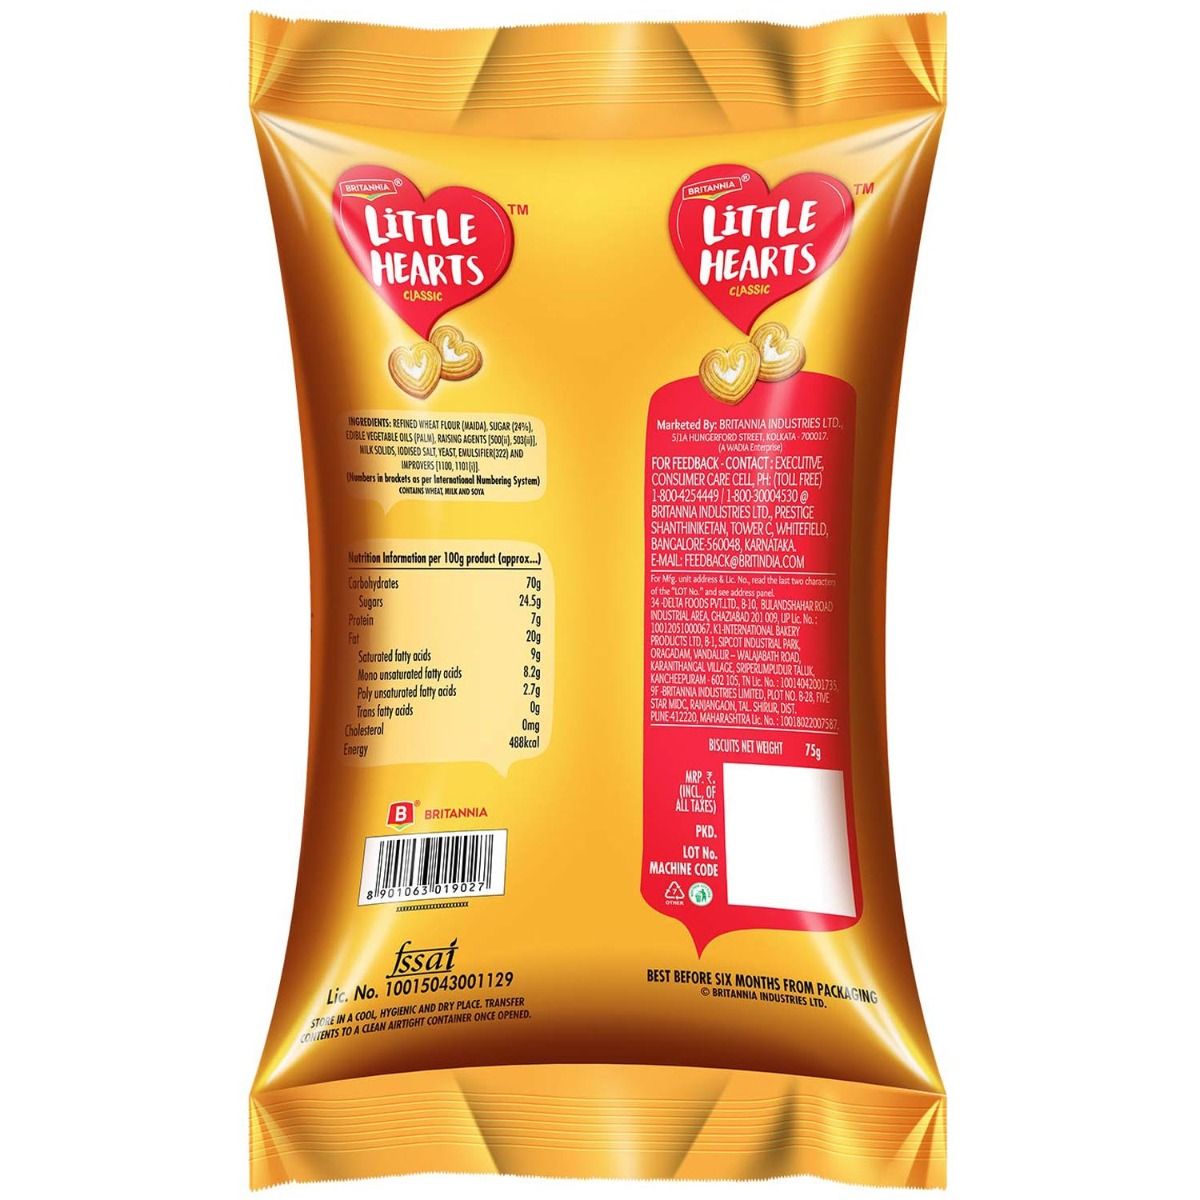 Britannia Little Hearts Biscuits, 75 gm, Pack of 1 